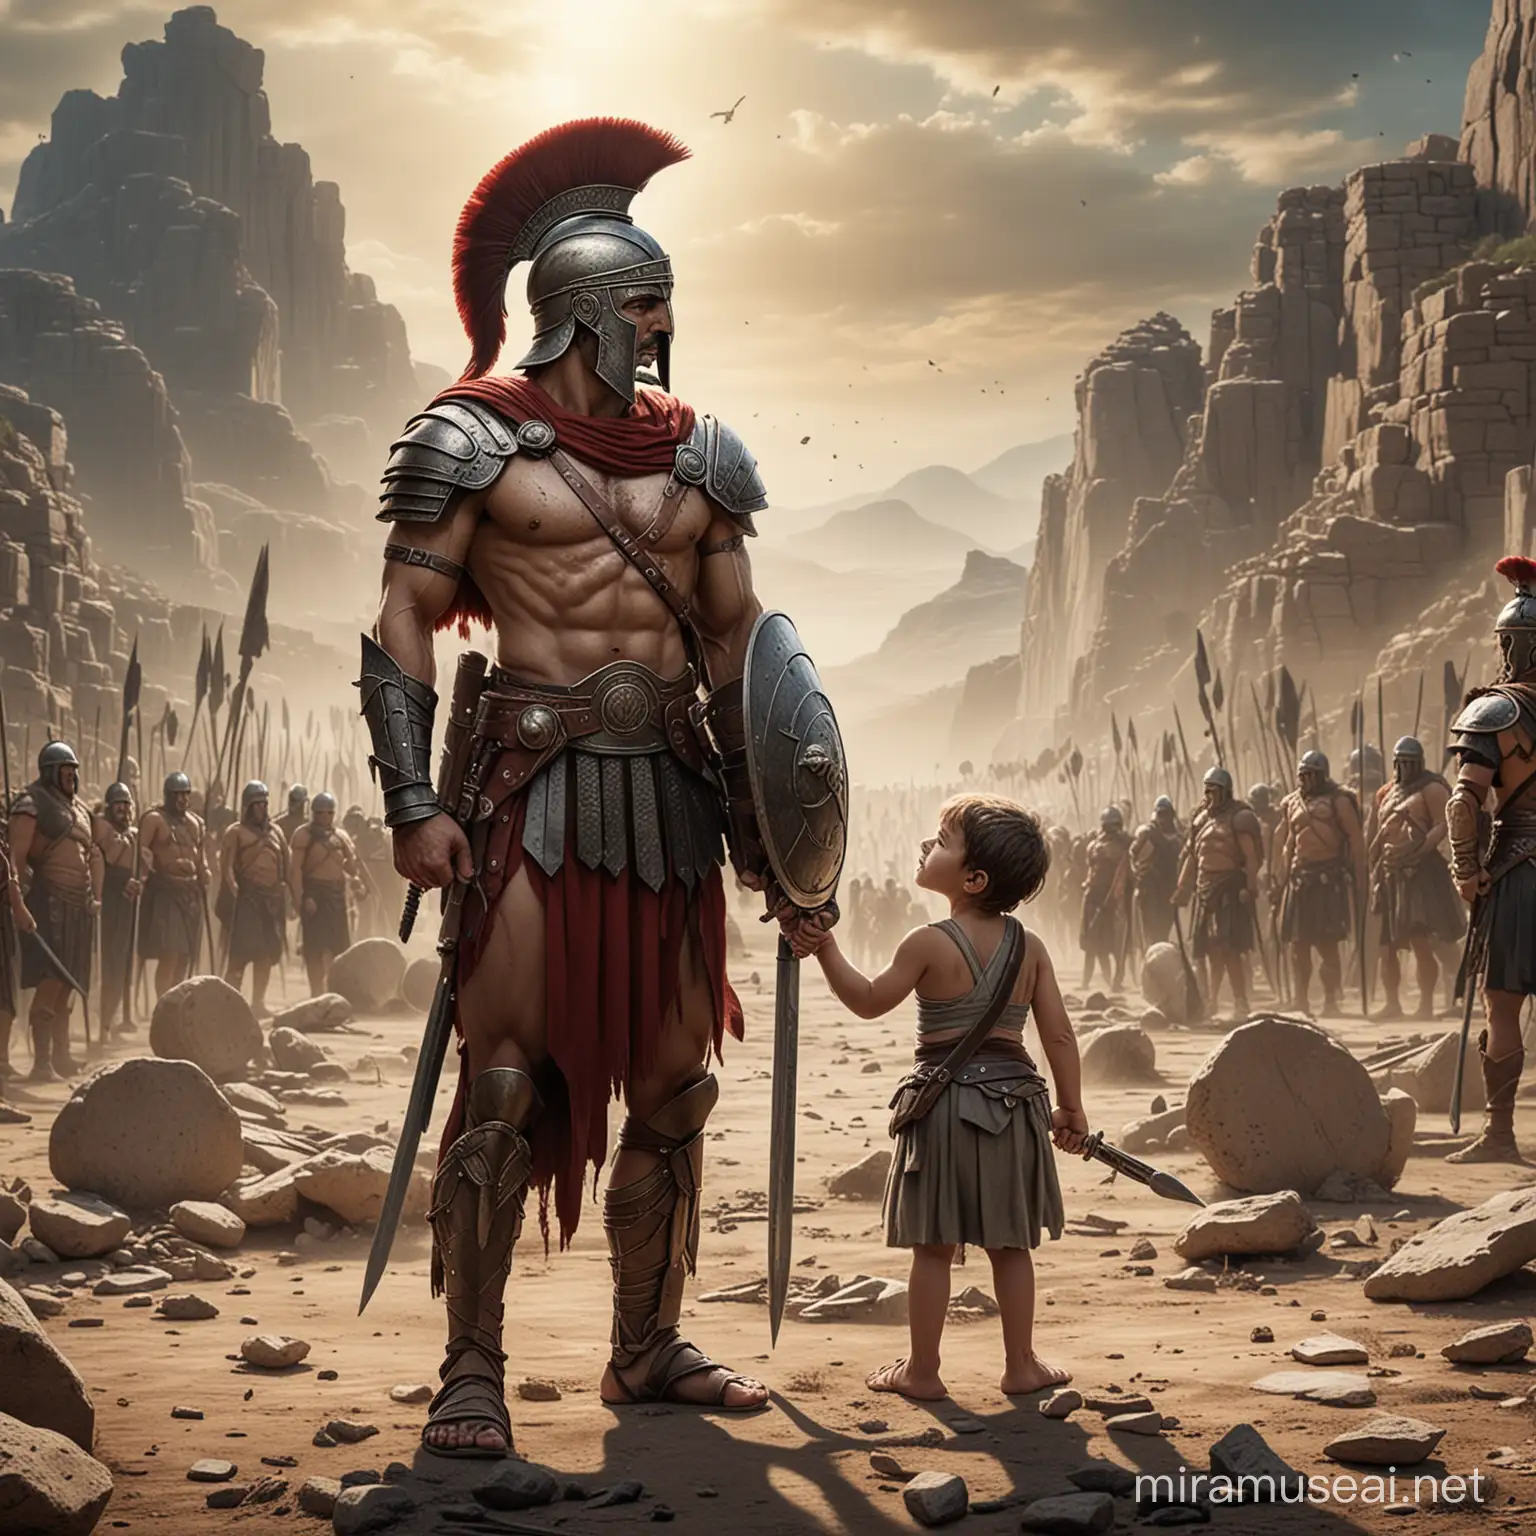 Courageous Spartan Warrior Protects Mother and Child Against Barbarian Horde